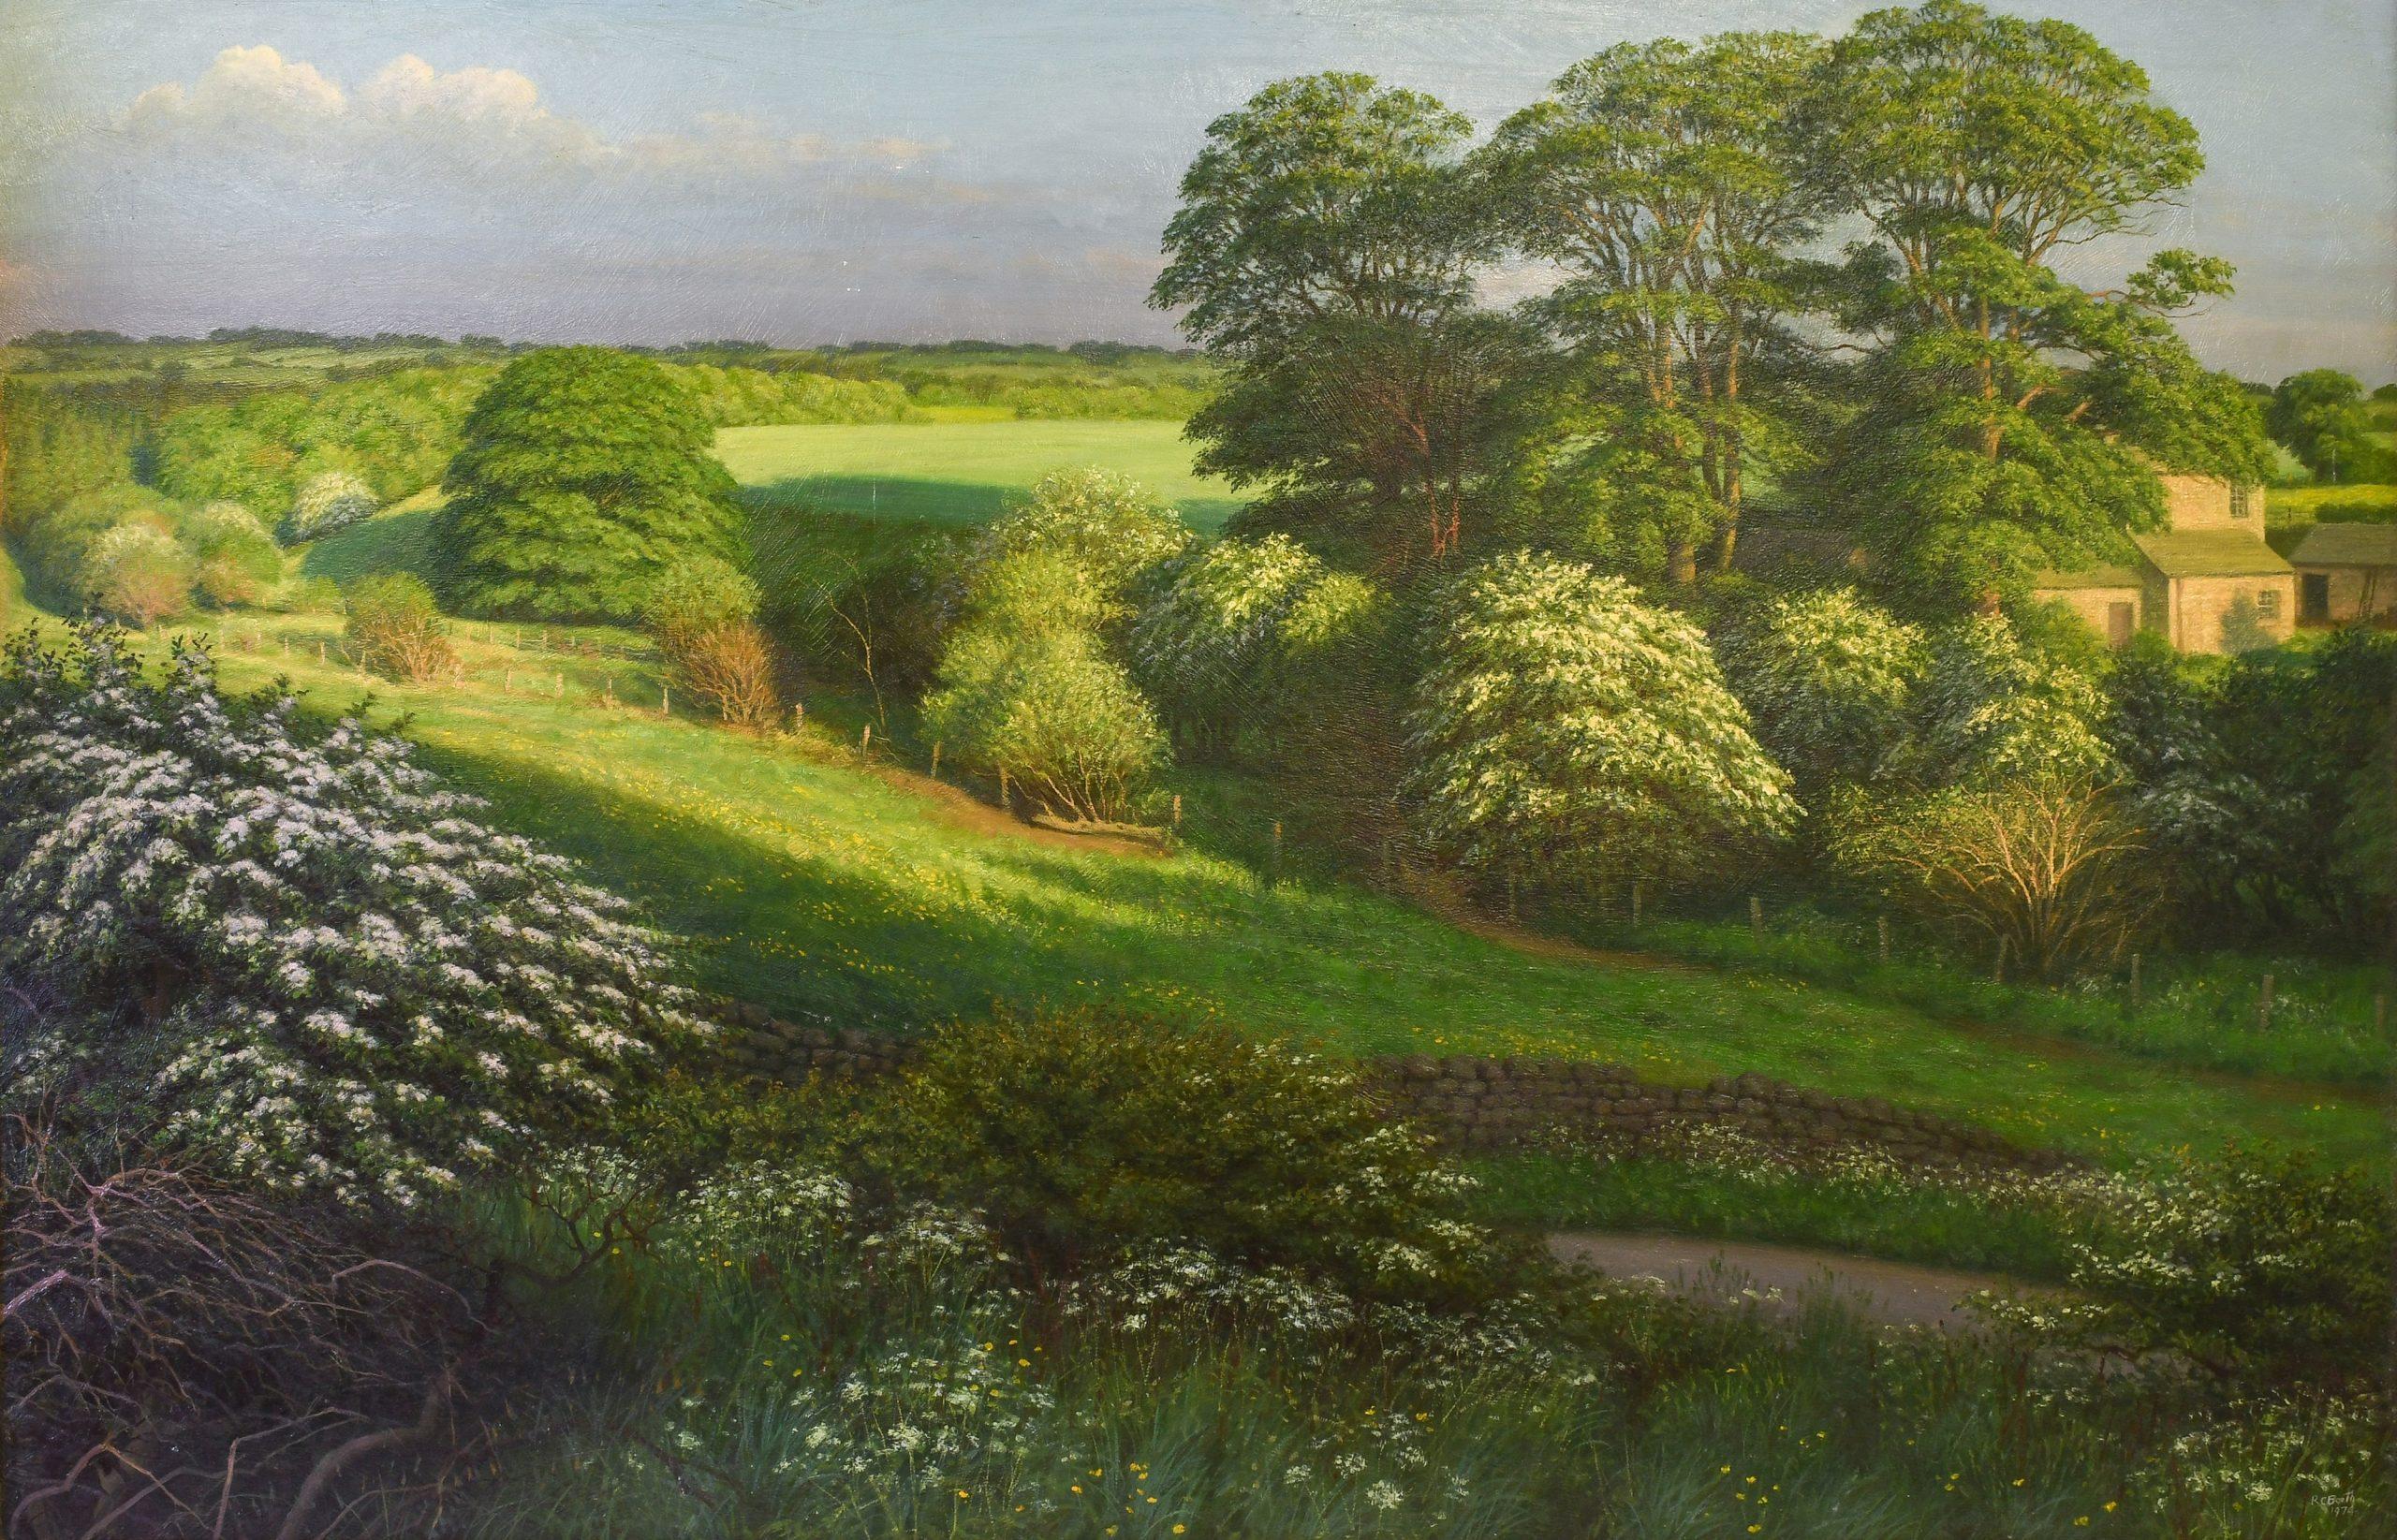 Raymond Booth Landscape Painting - Evening Landscape in Late May, 1970s Yorkshire Landscape, Oil on Board, Signed